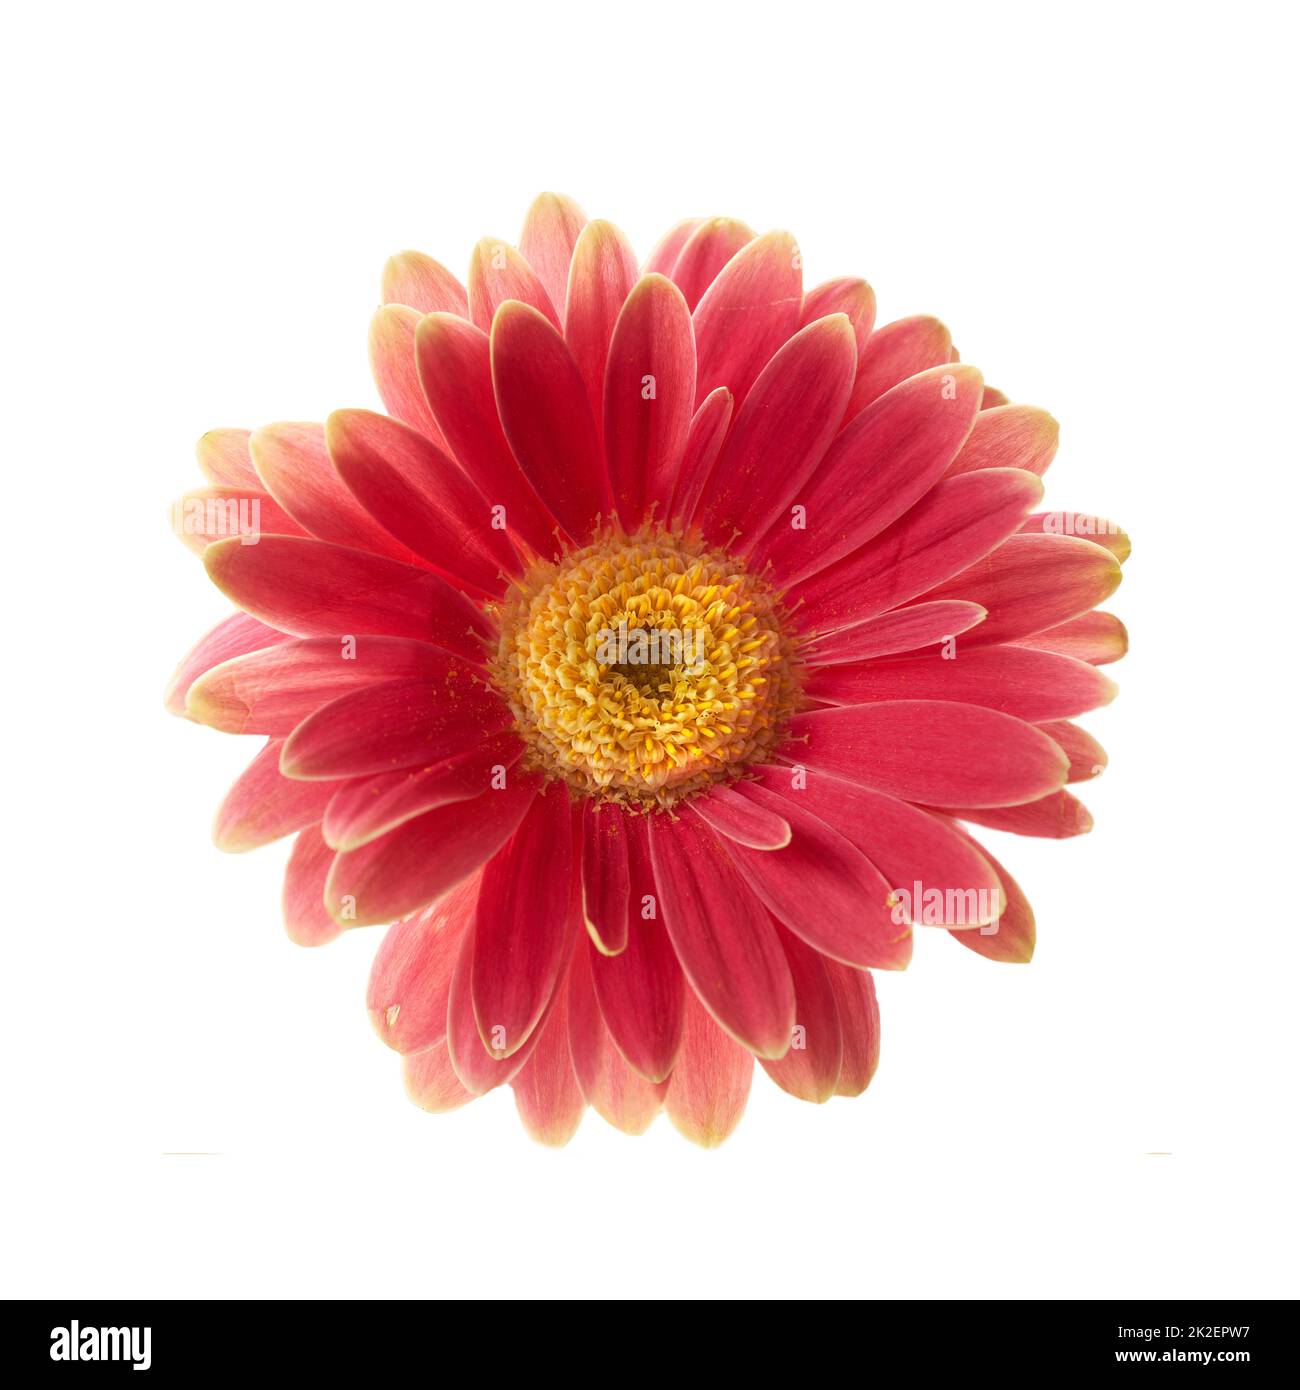 Beautiful gerbera flower. Gerbera is native to tropical regions of South America, Africa and Asia.. Stock Photo